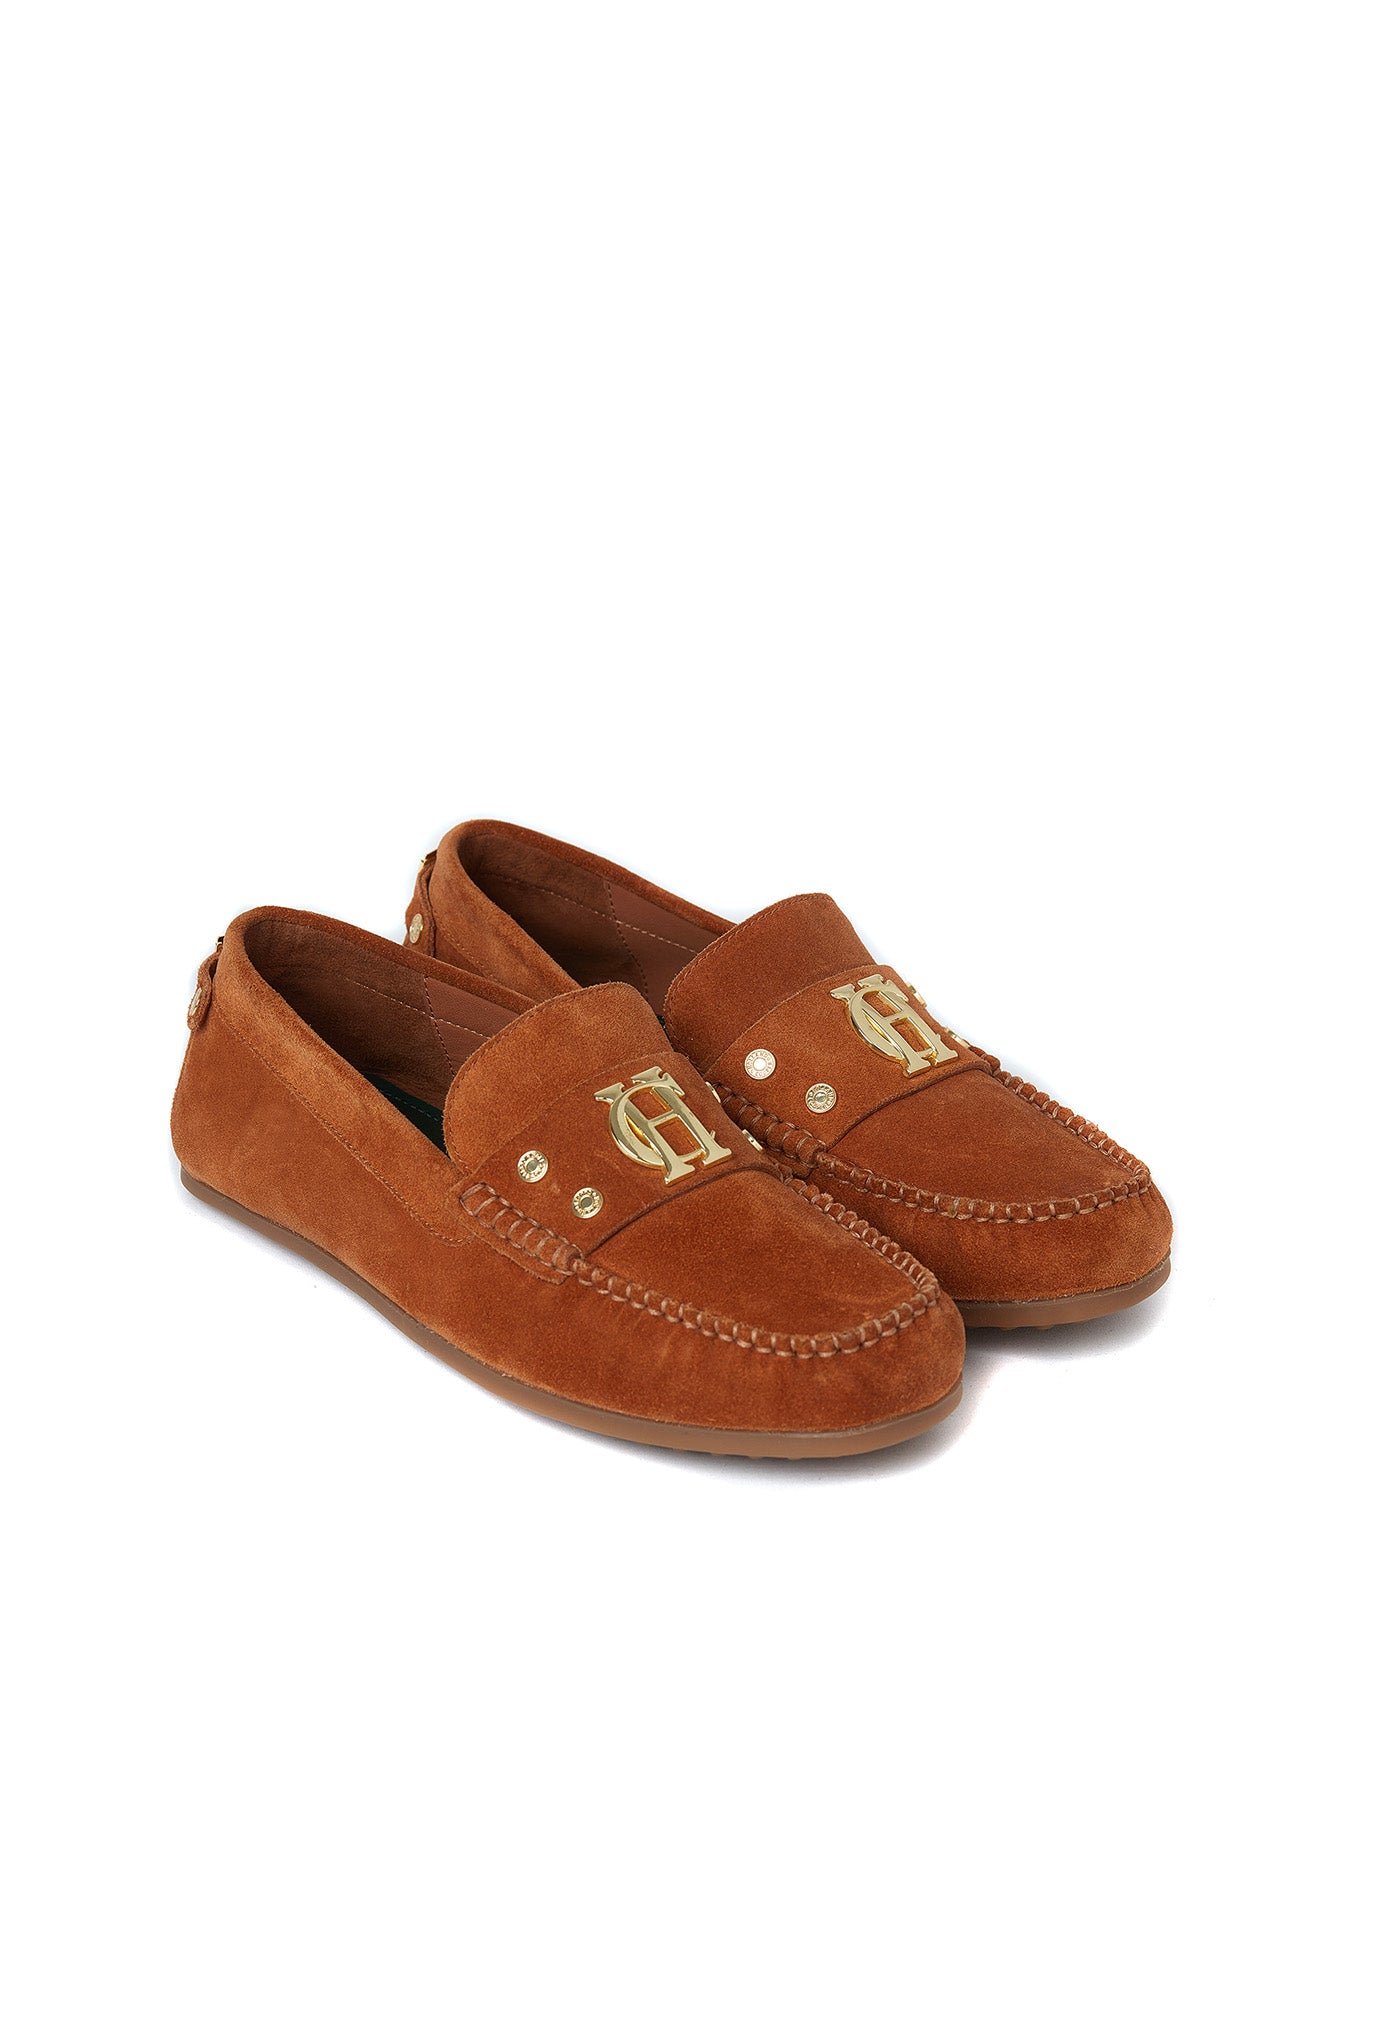 The Driving Loafer - Tan sold by Angel Divine